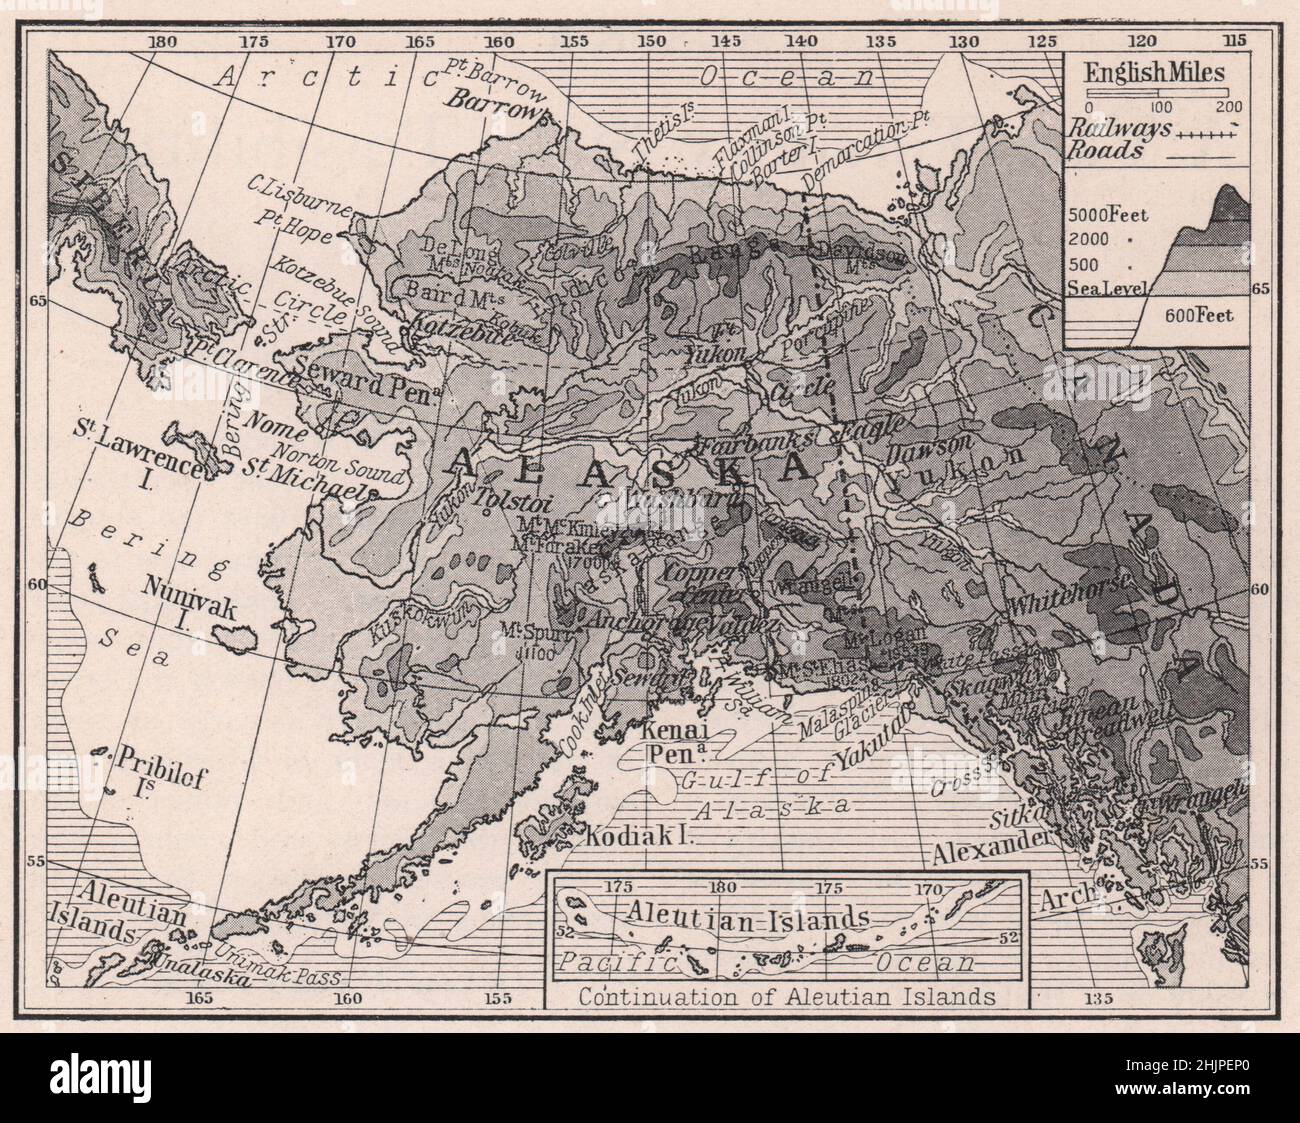 Physical features of the Territory of Alaska (1923 map) Stock Photo